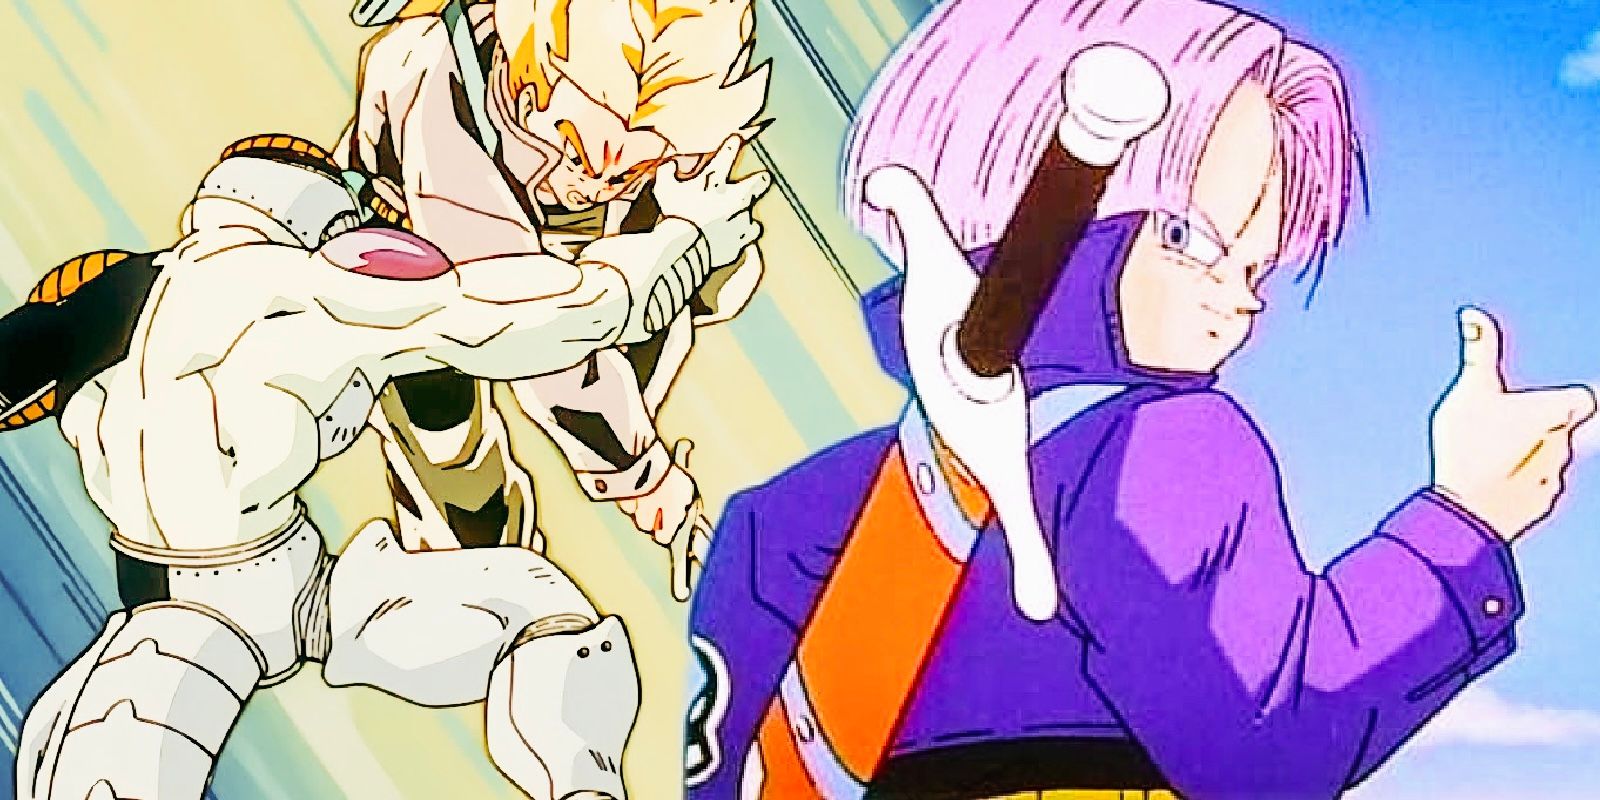 Future Trunks killing frieza and giving thumbs up in dragon ball z